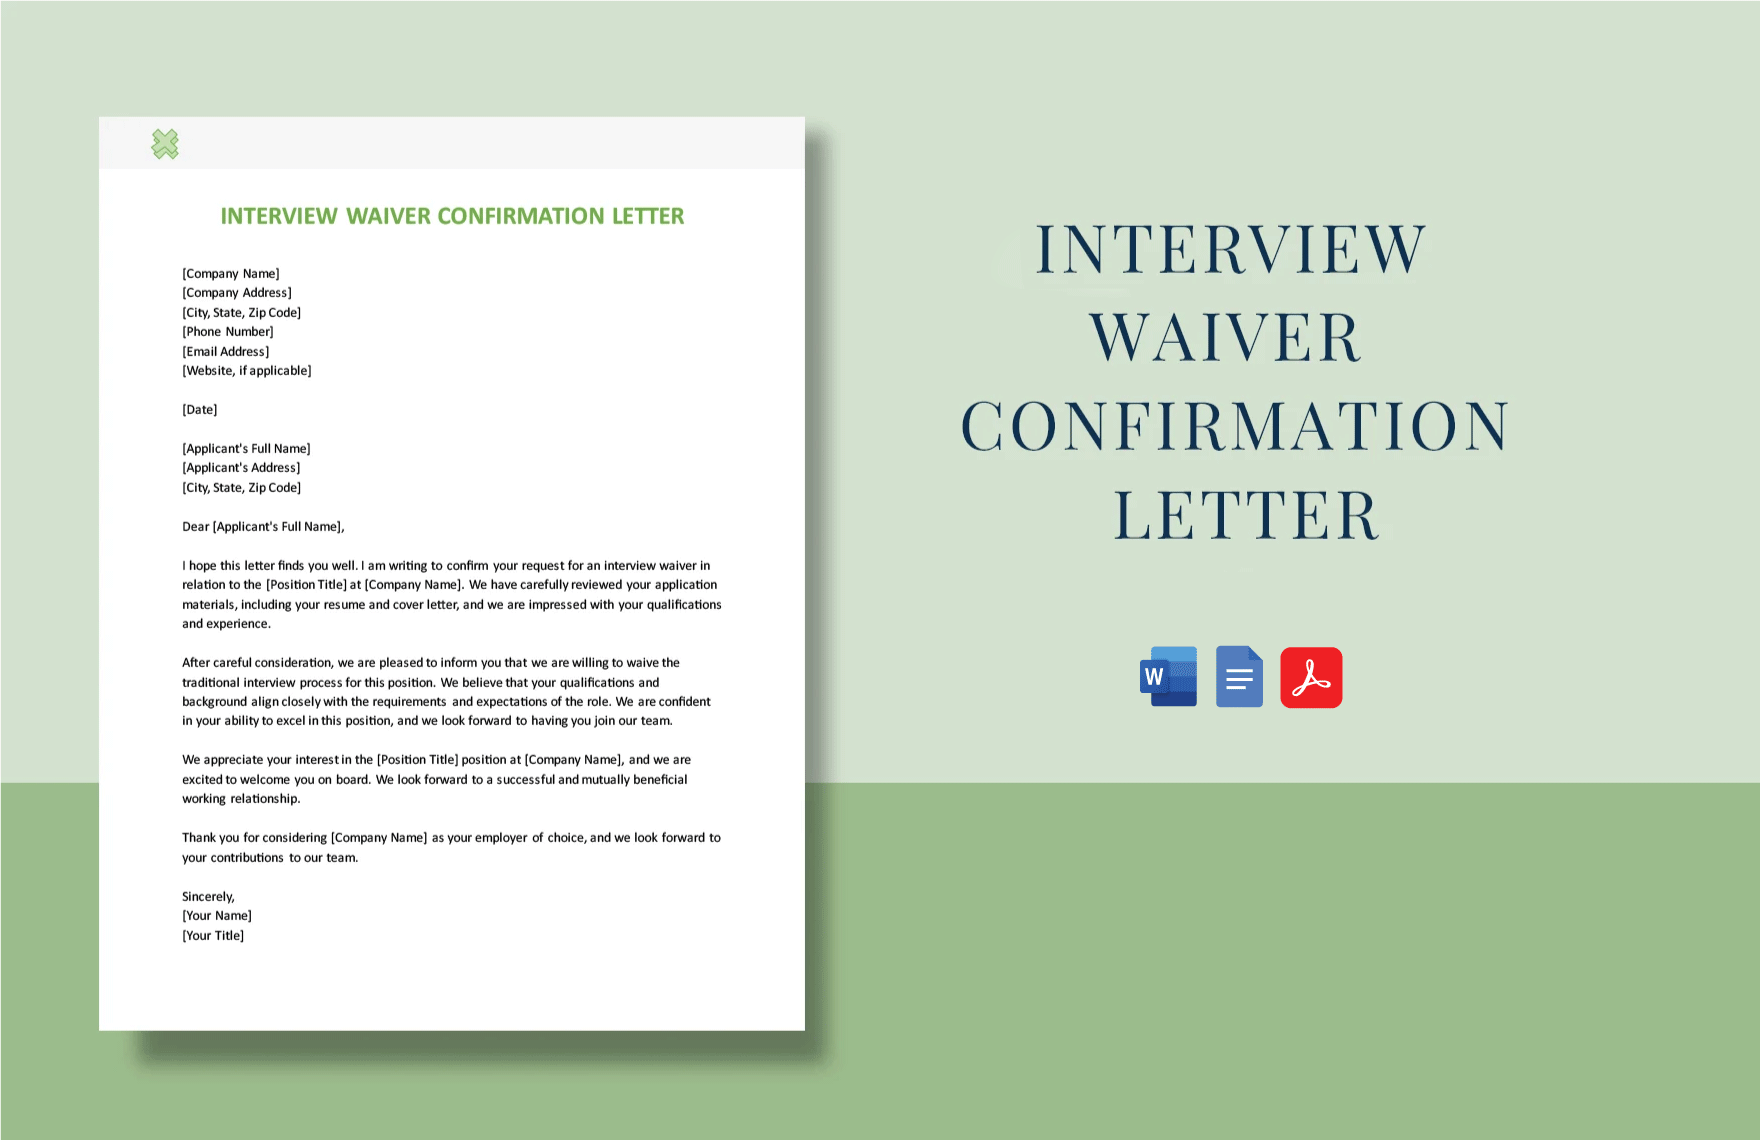 Interview Waiver Confirmation Letter in Word, Google Docs, PDF